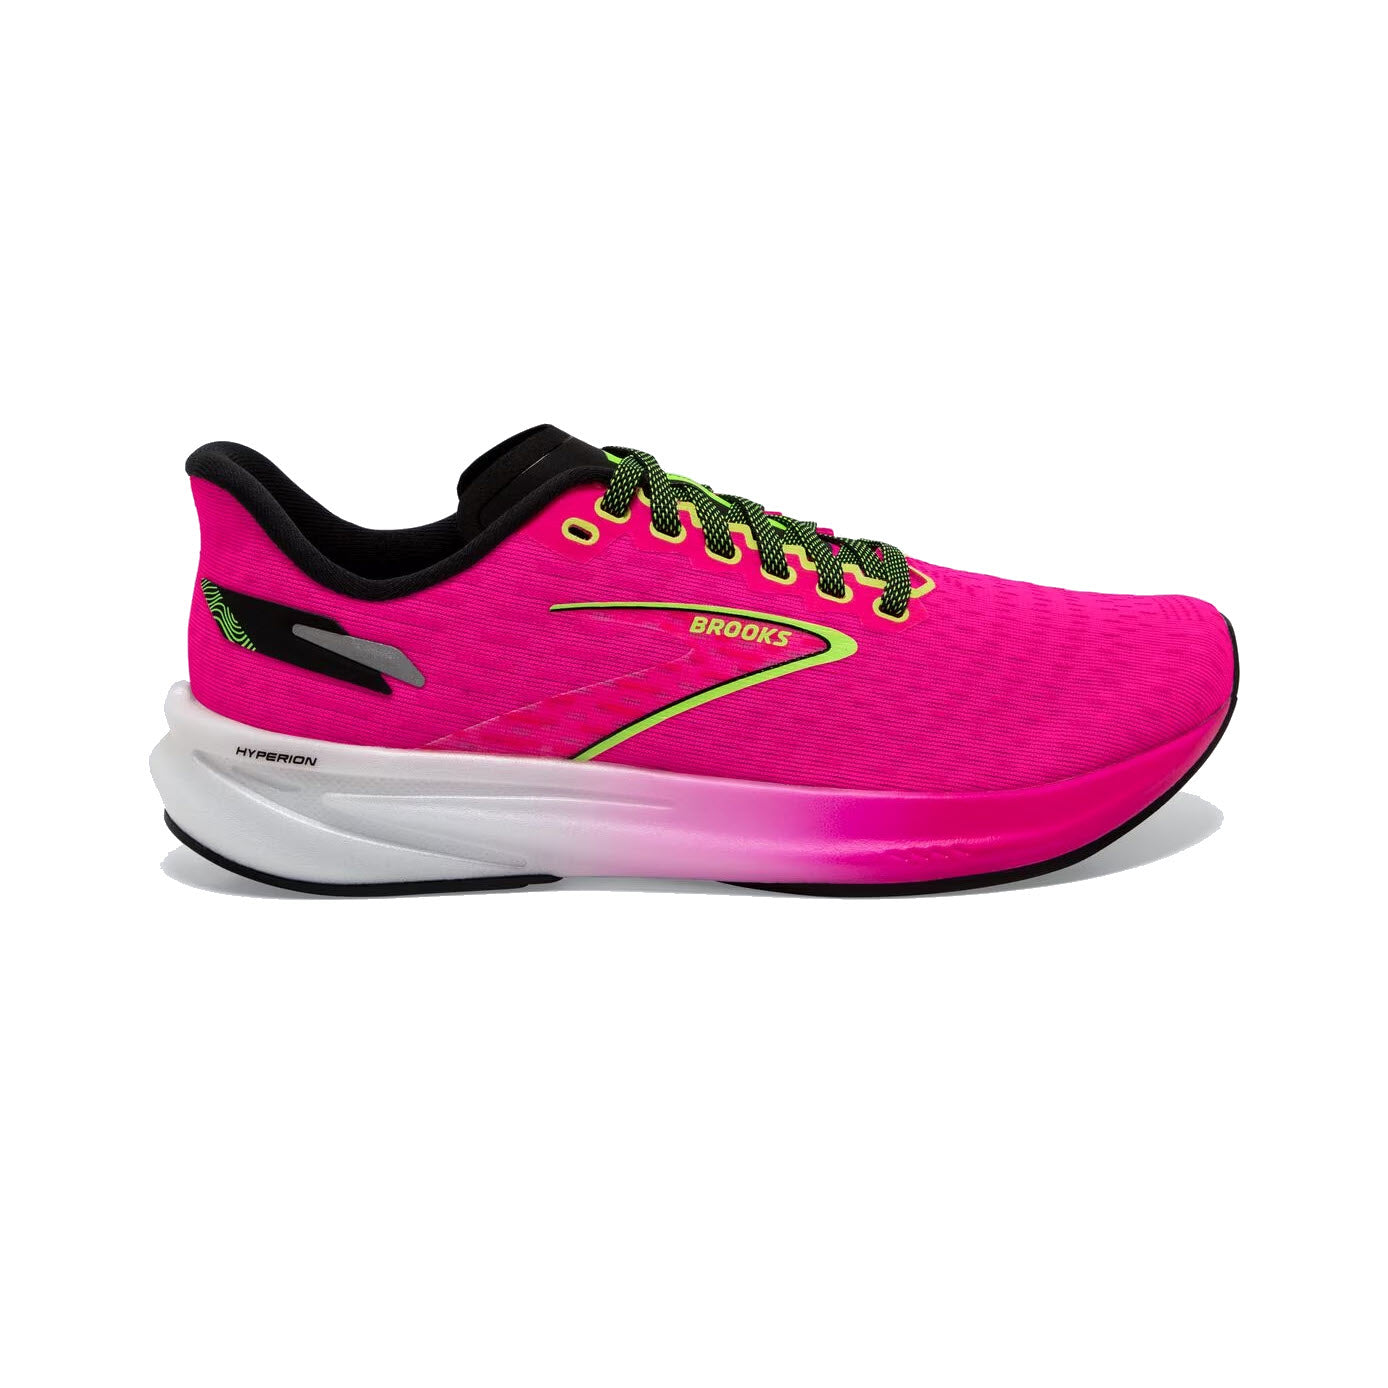 A bright pink Brooks Hyperion running shoe with neon green laces and accents, featuring a white sole and black inner lining, designed for speedy training days.